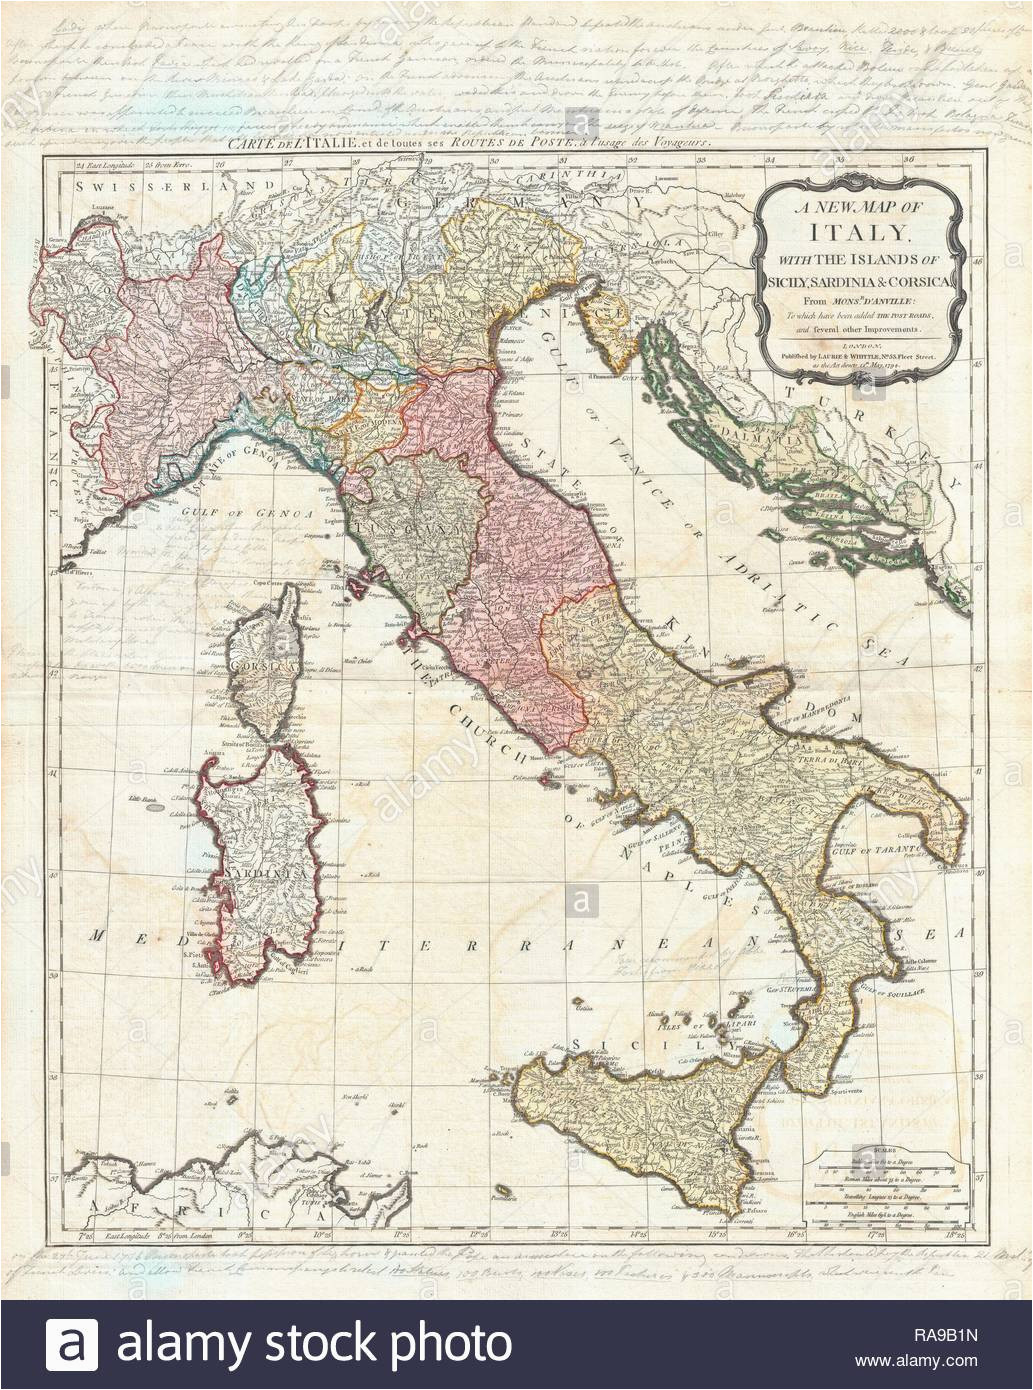 historic map italy stock photos historic map italy stock images